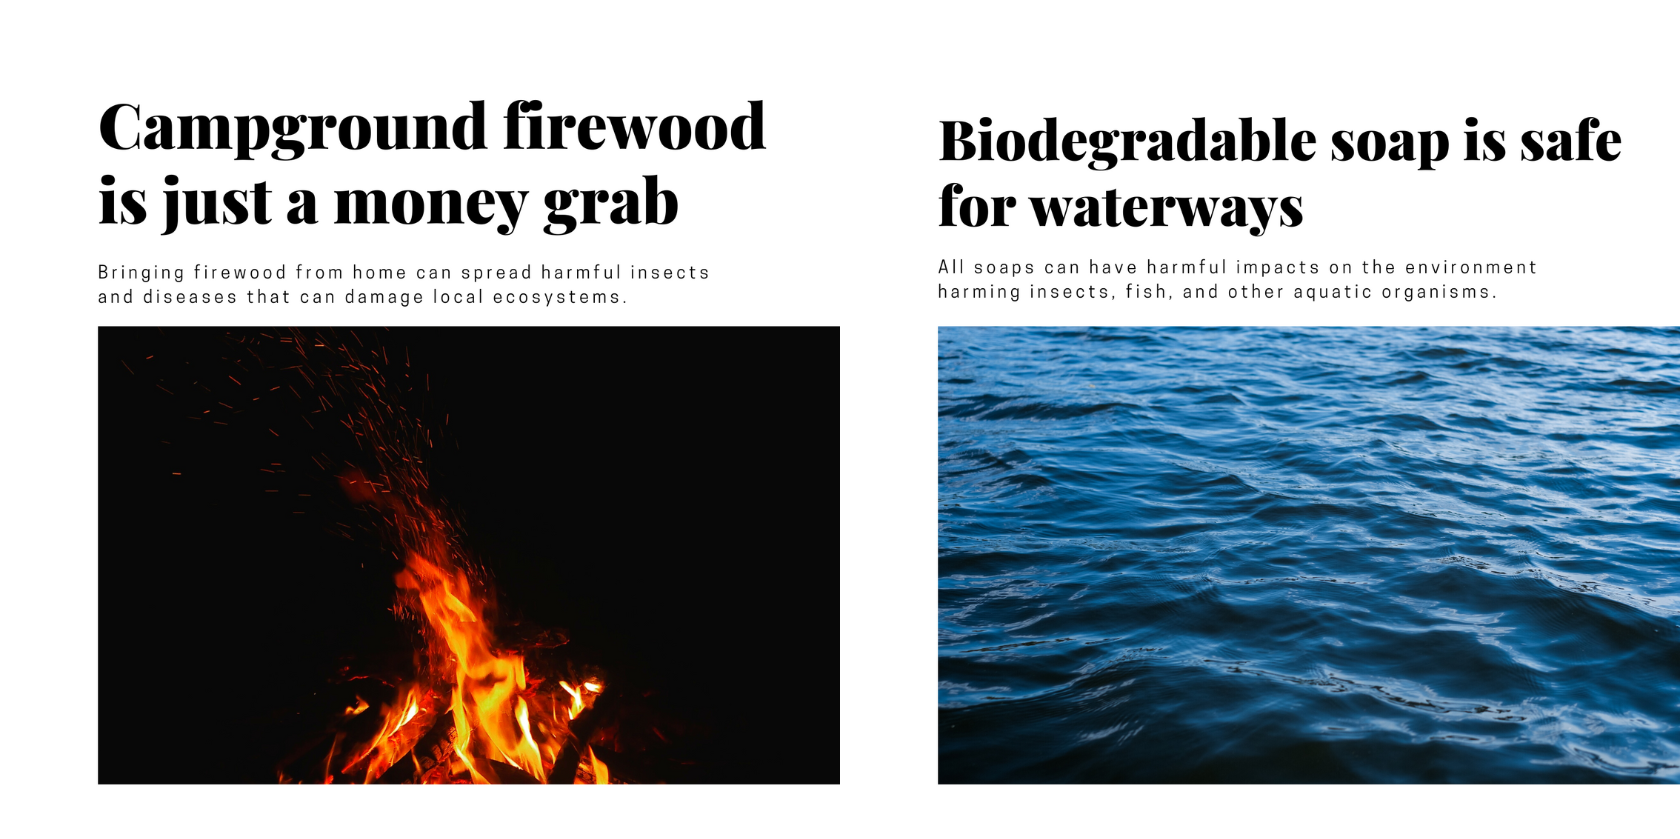 Outdoor Myths Debunked:

Campground firewood is not just a money grab. It prevents the spread of harmful insects that can damage environments.

Biodegradable soap is not safe for waterways. It can harm aquatic organisms including fish and insects.